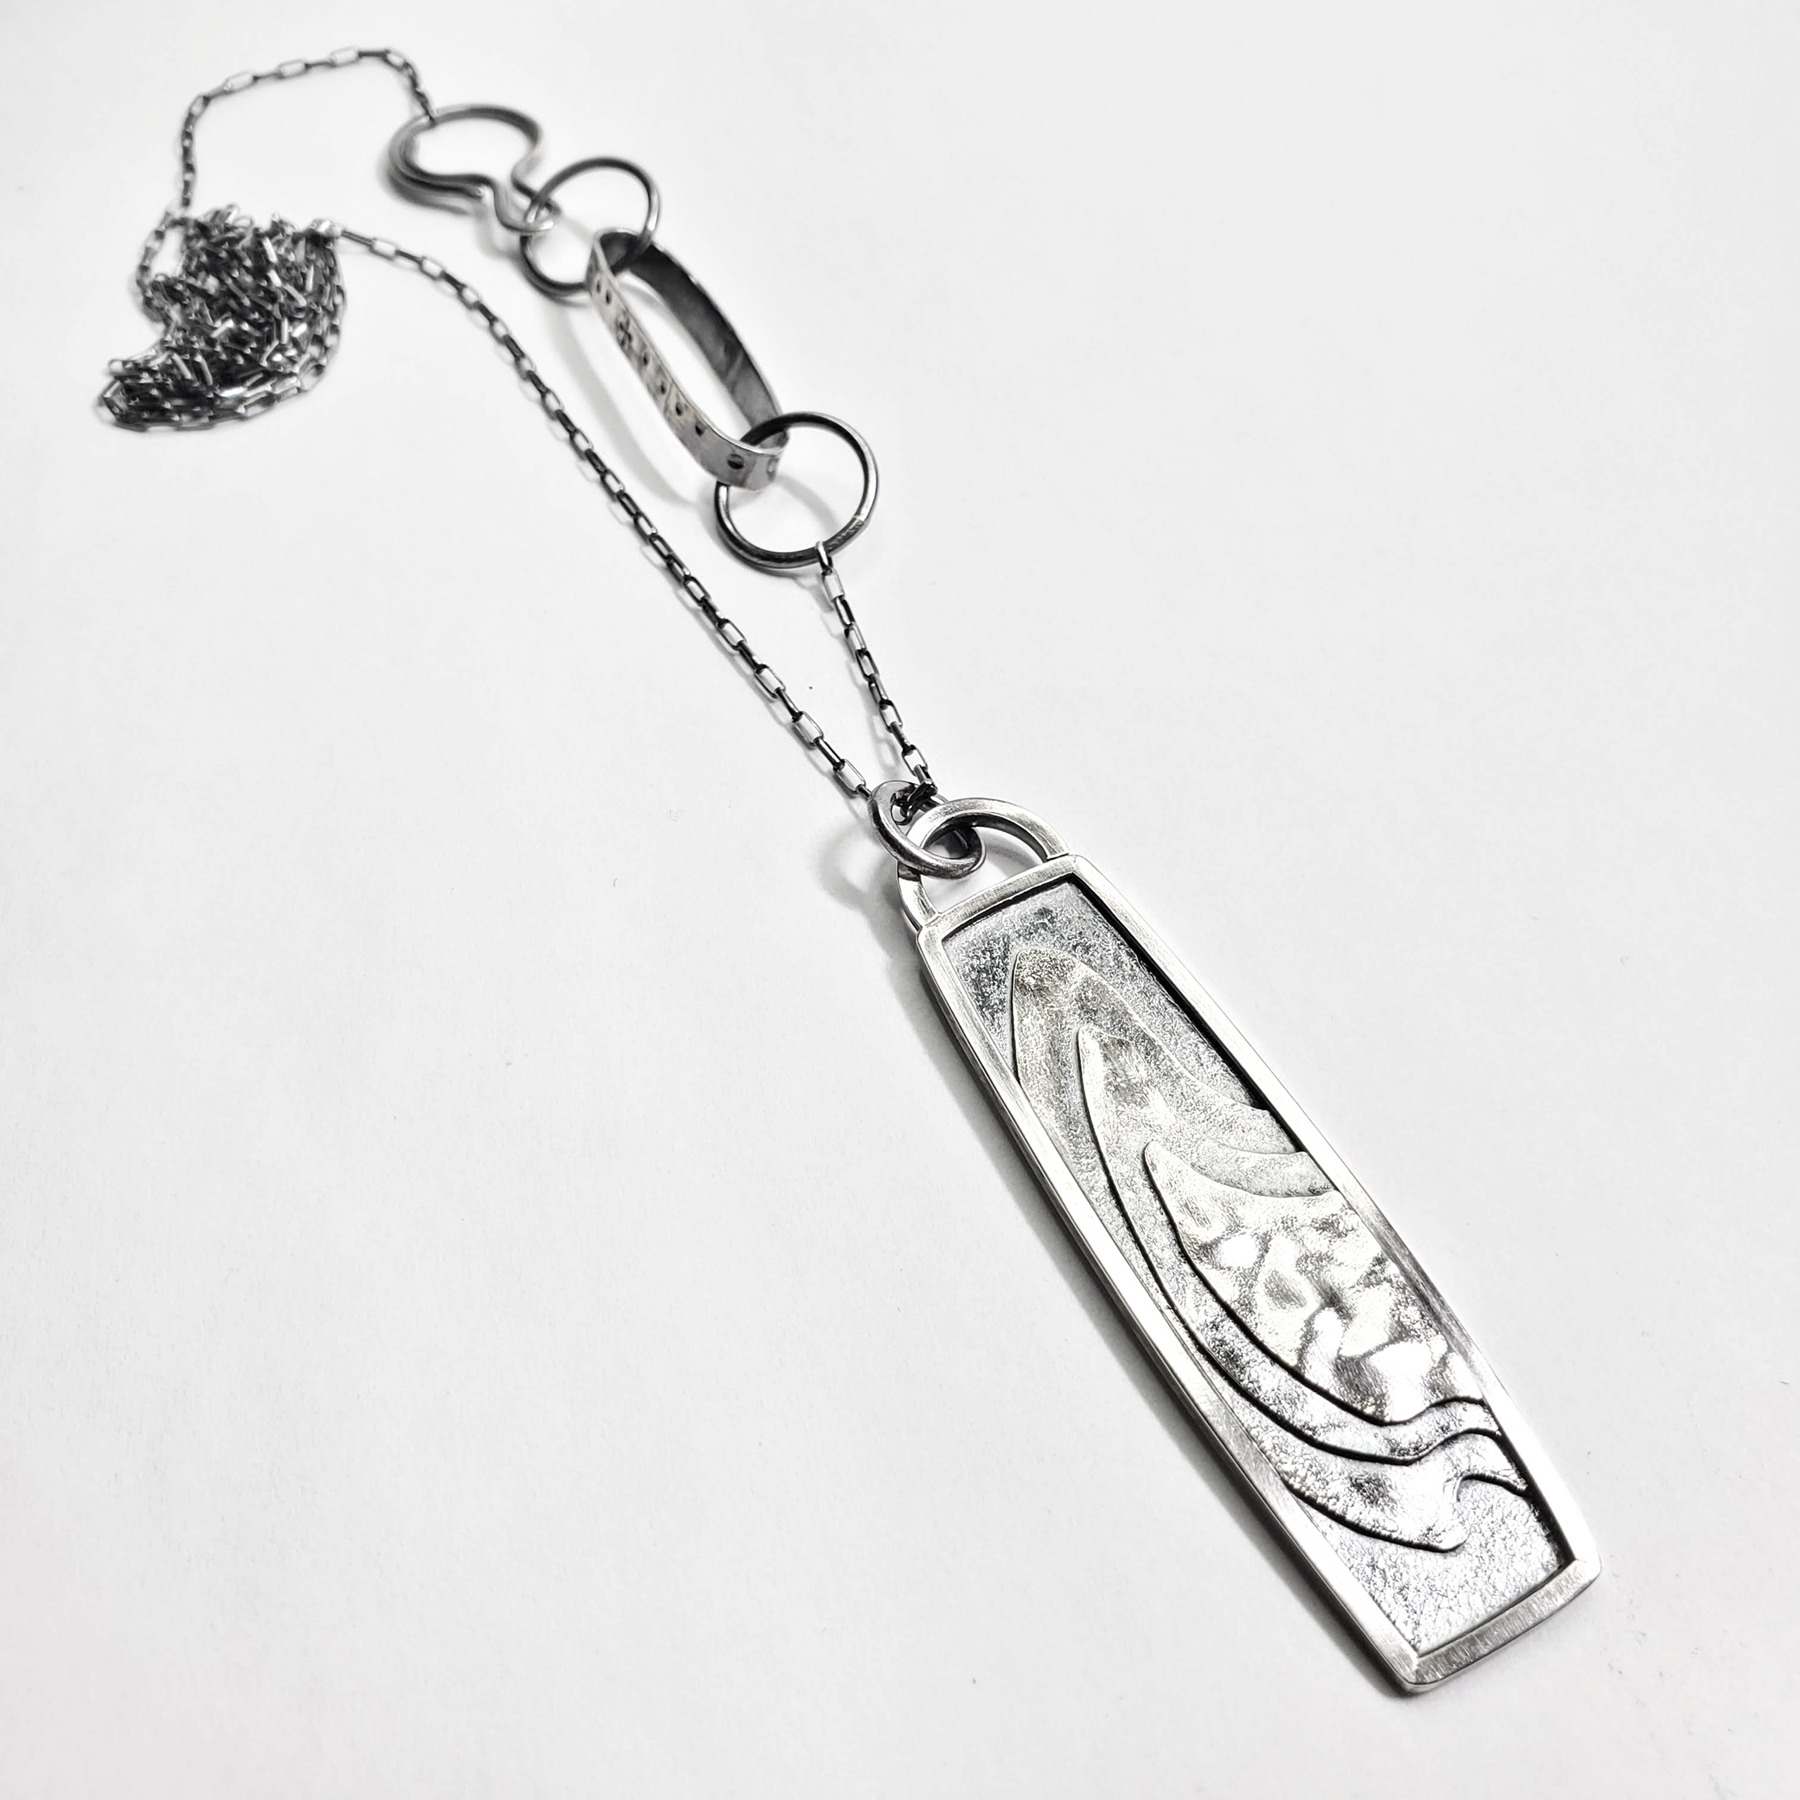 Silver Pendant with terrain design, image courtesy of Christen Booth